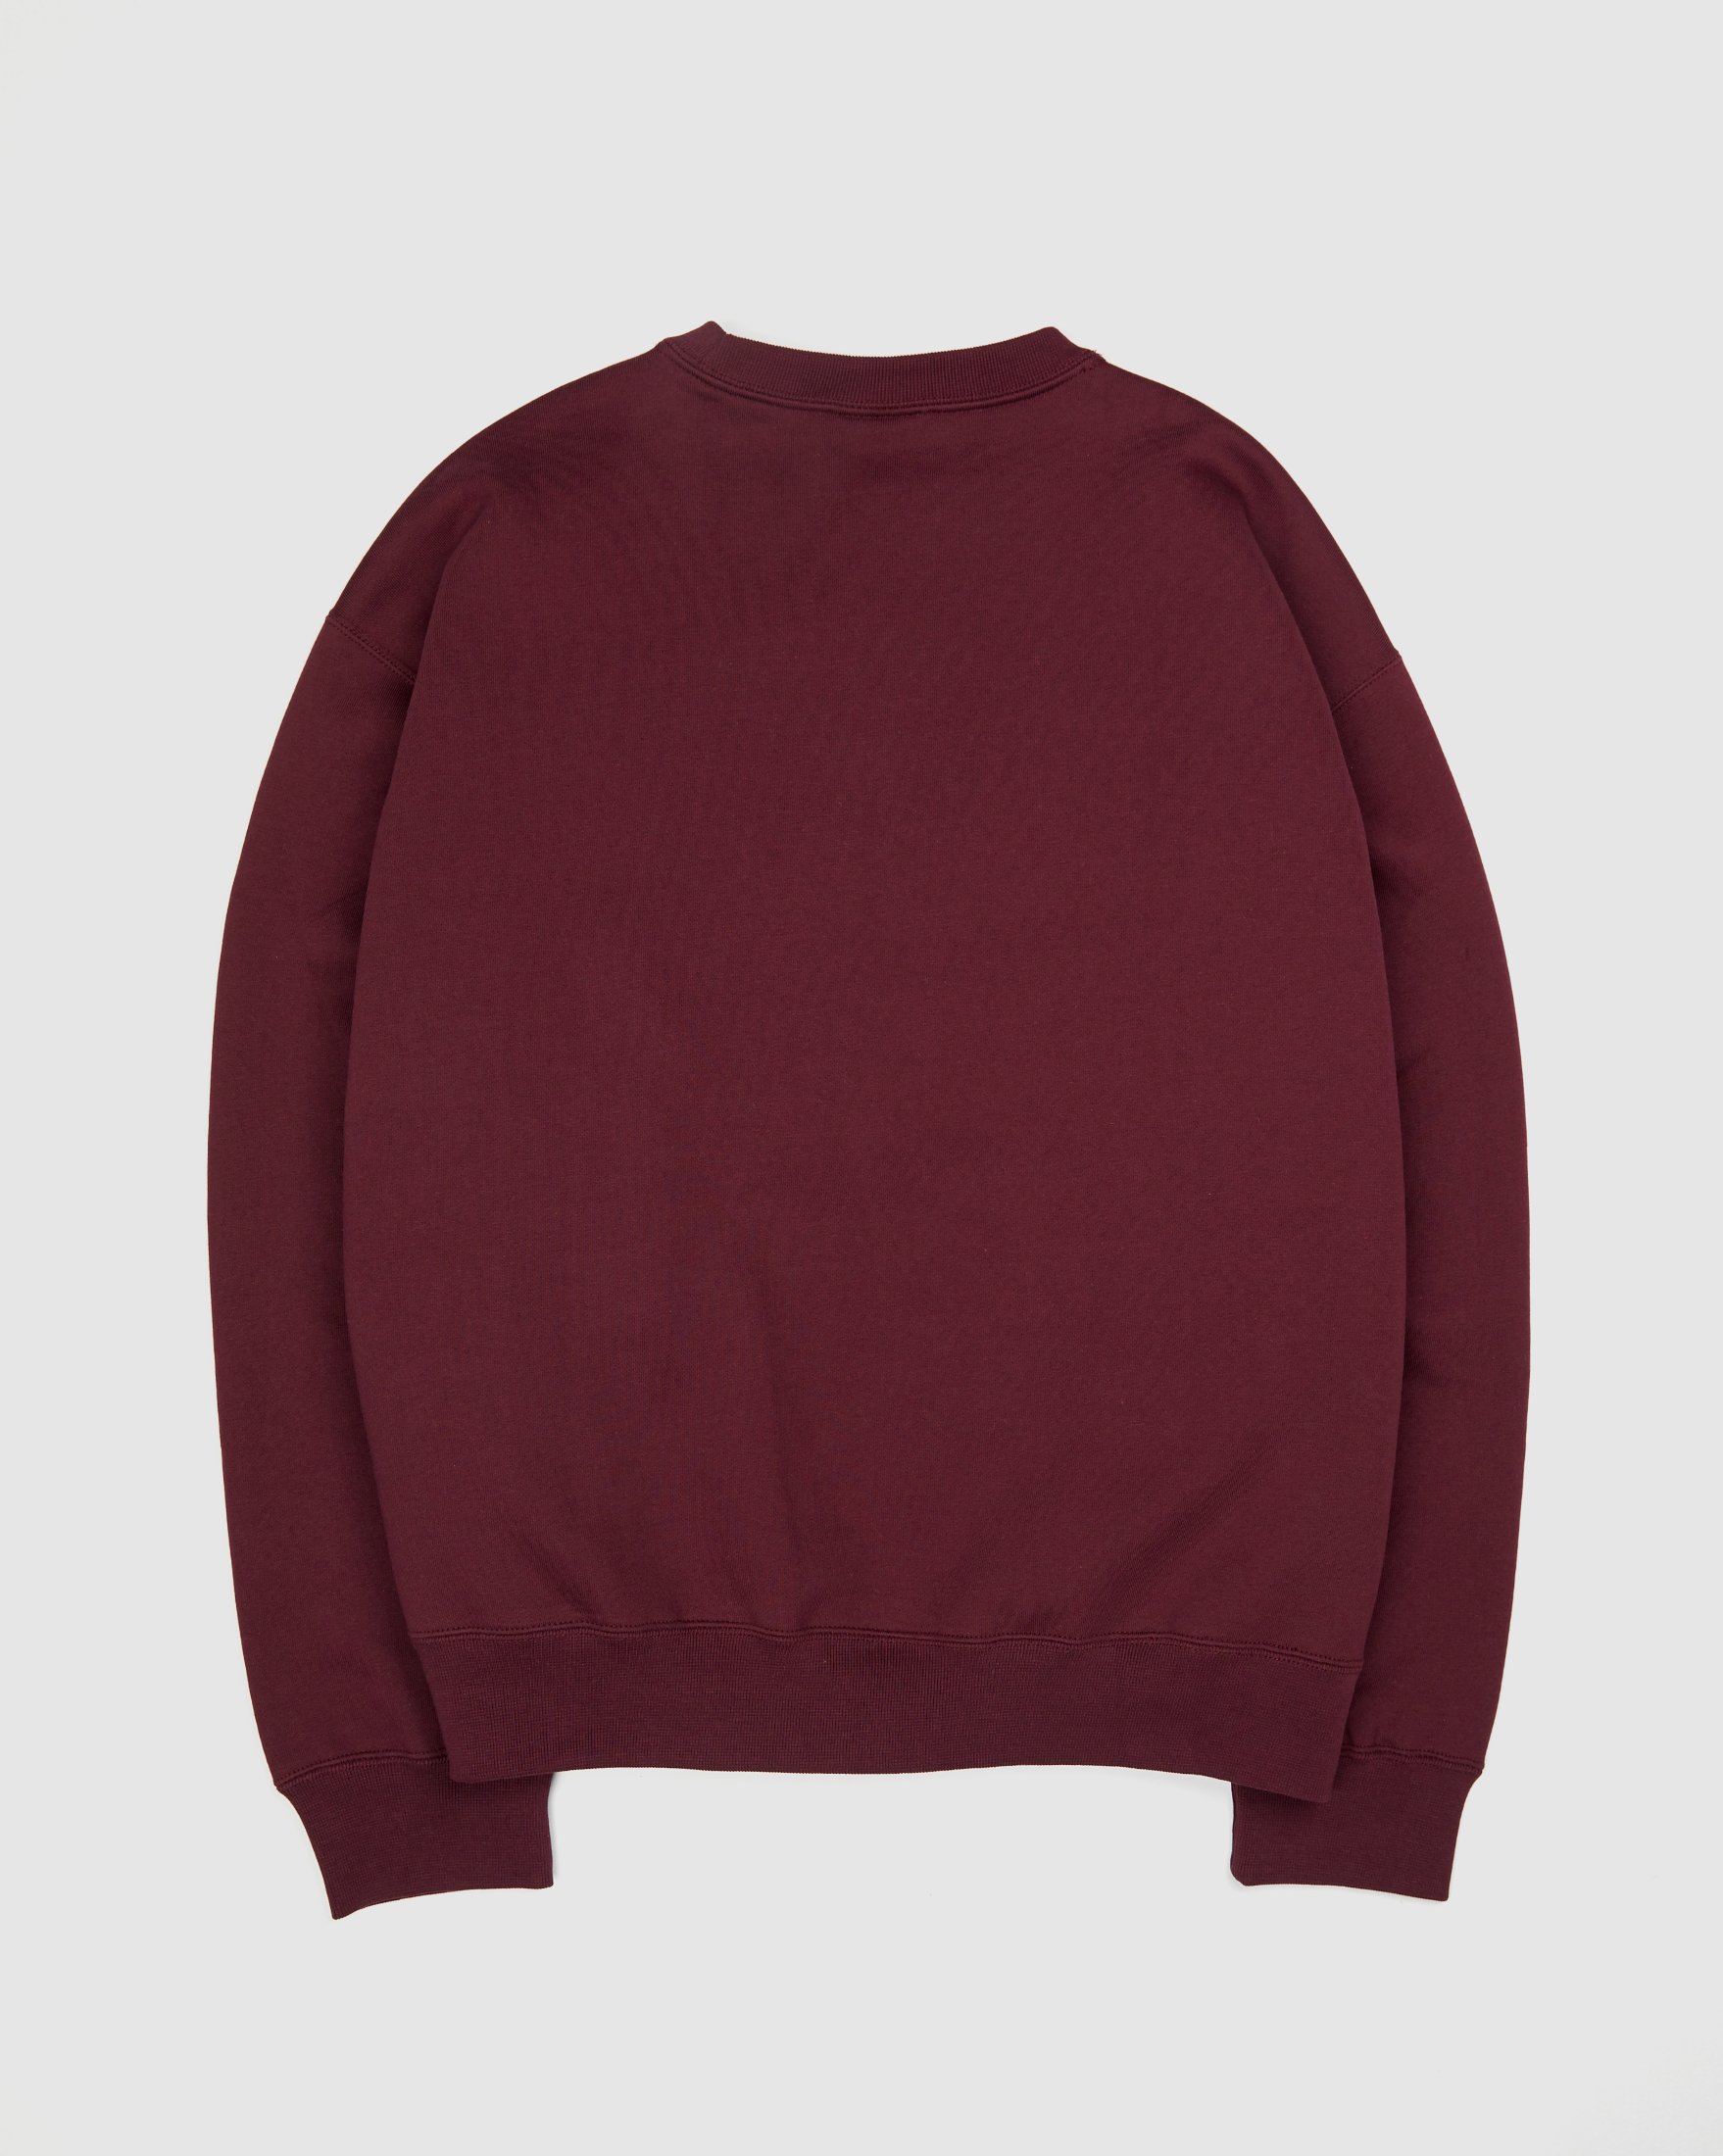 Nike ACG - Allover Print Crew Sweater Burgundy - Clothing - Red - Image 2